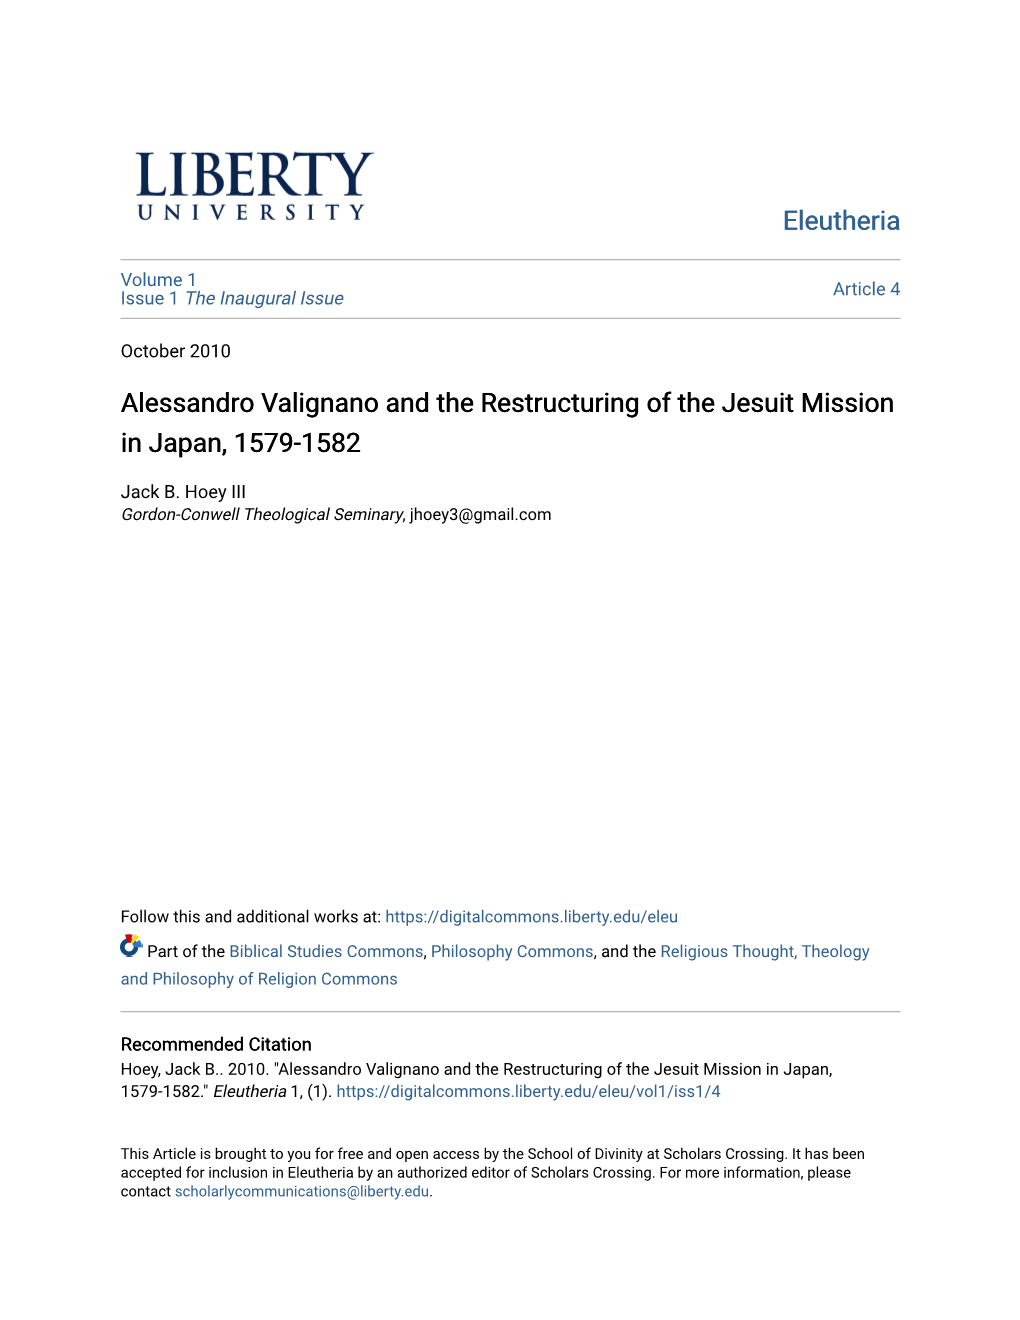 Alessandro Valignano and the Restructuring of the Jesuit Mission in Japan, 1579-1582